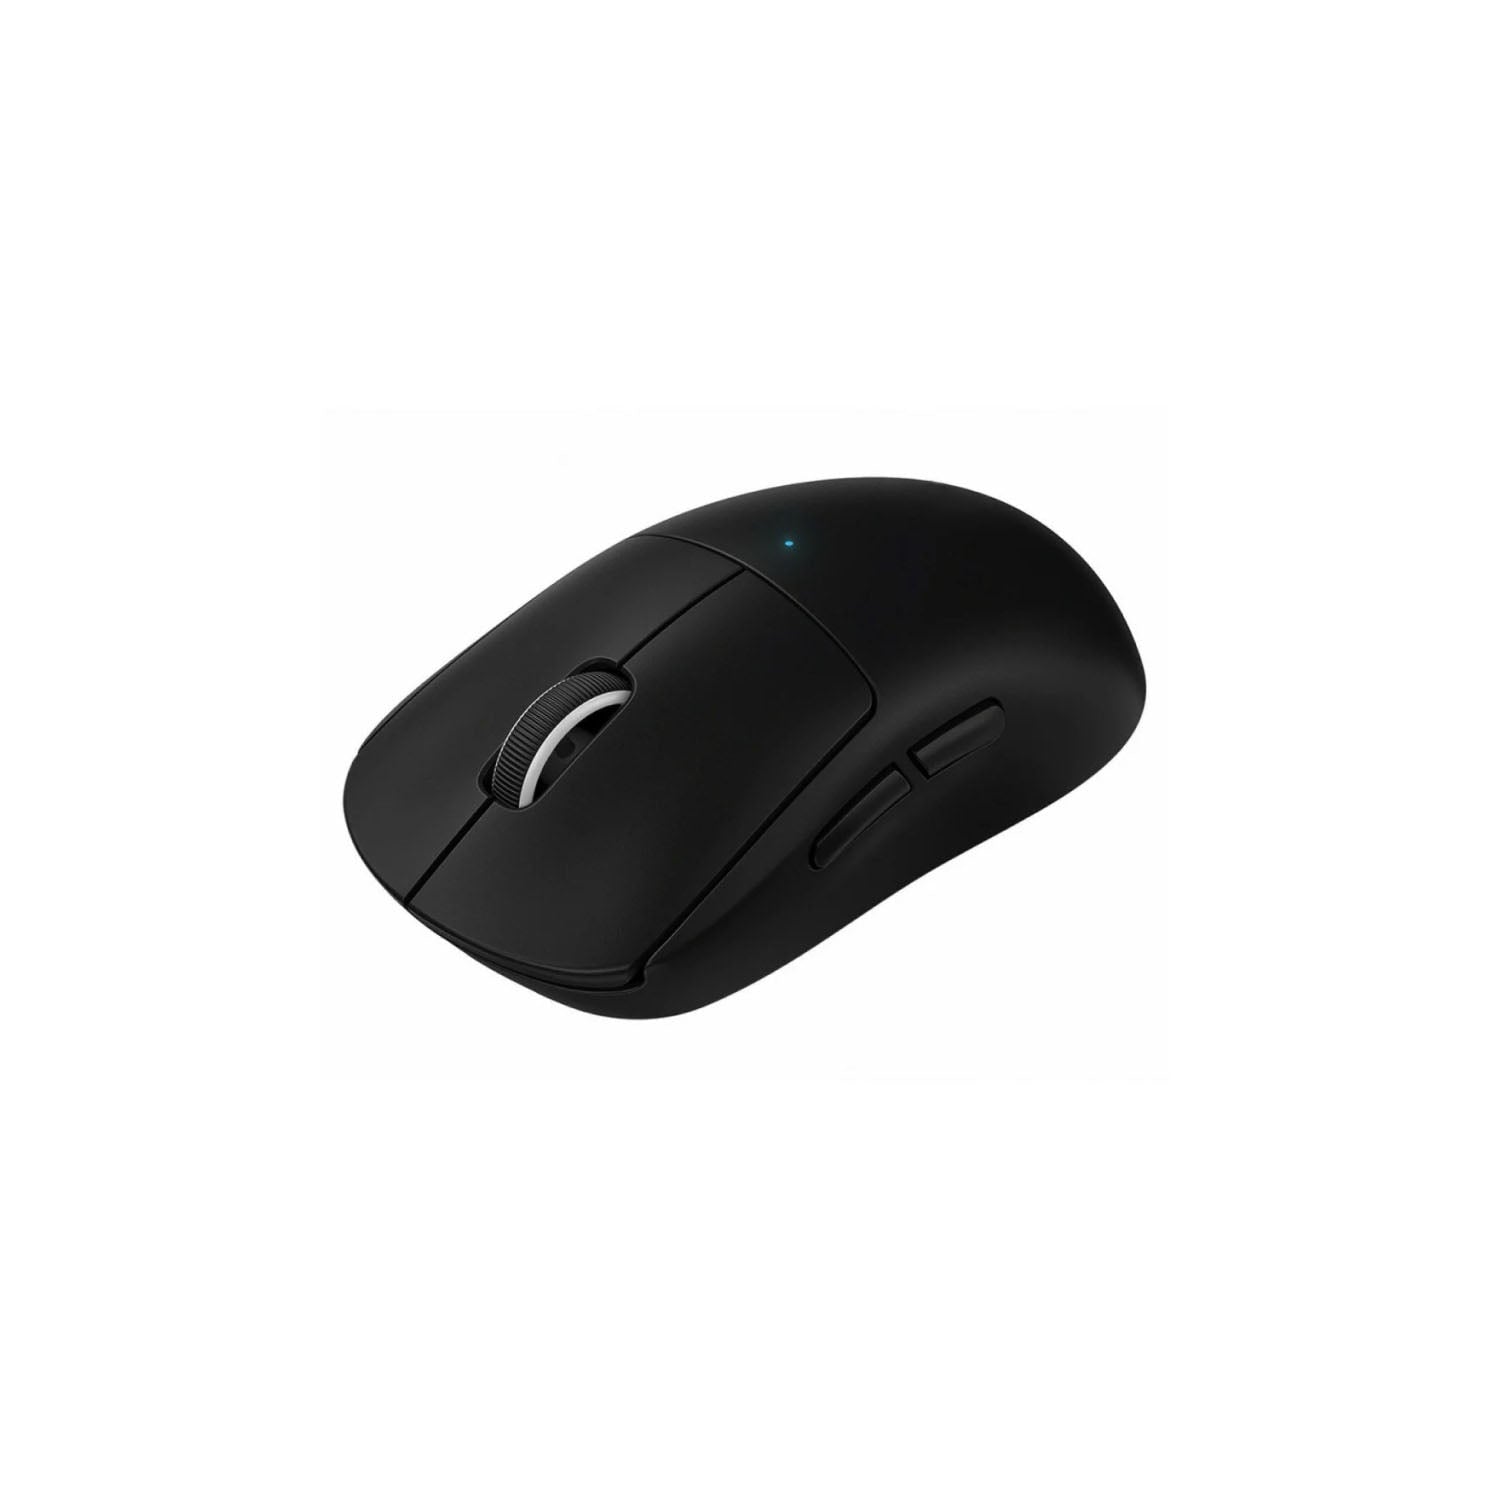 Mouse ultra wireless